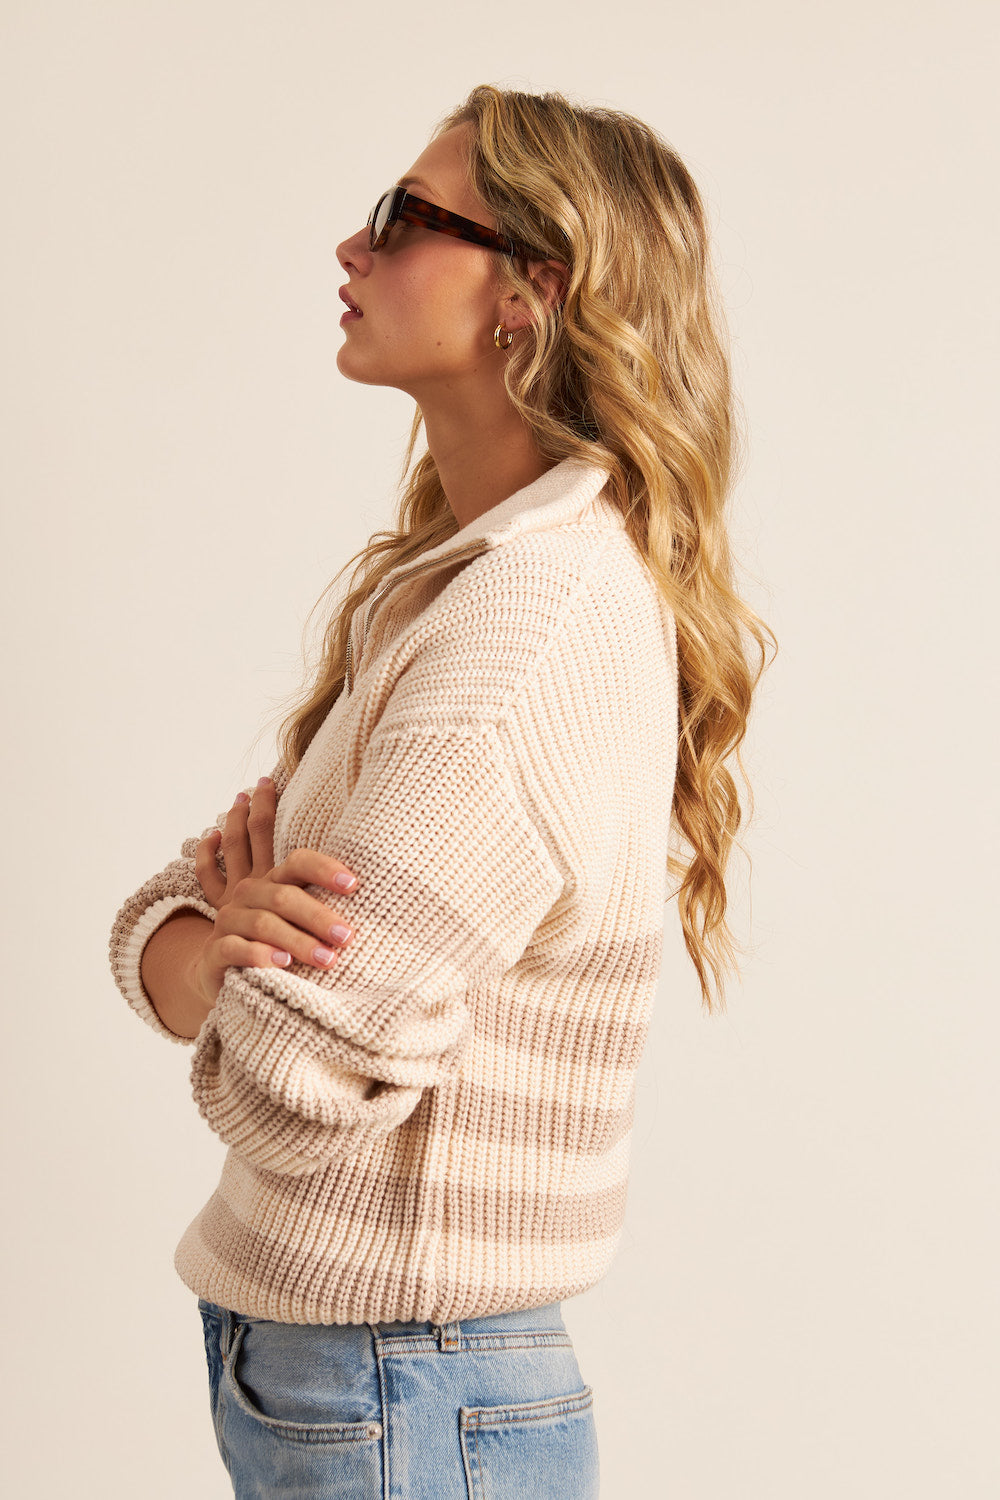 John & Jenn Kincaid Sweater - Cappuccino Clothing - Tops - Sweaters - Pullovers - Heavy Knit Pullovers by John & Jenn | Grace the Boutique